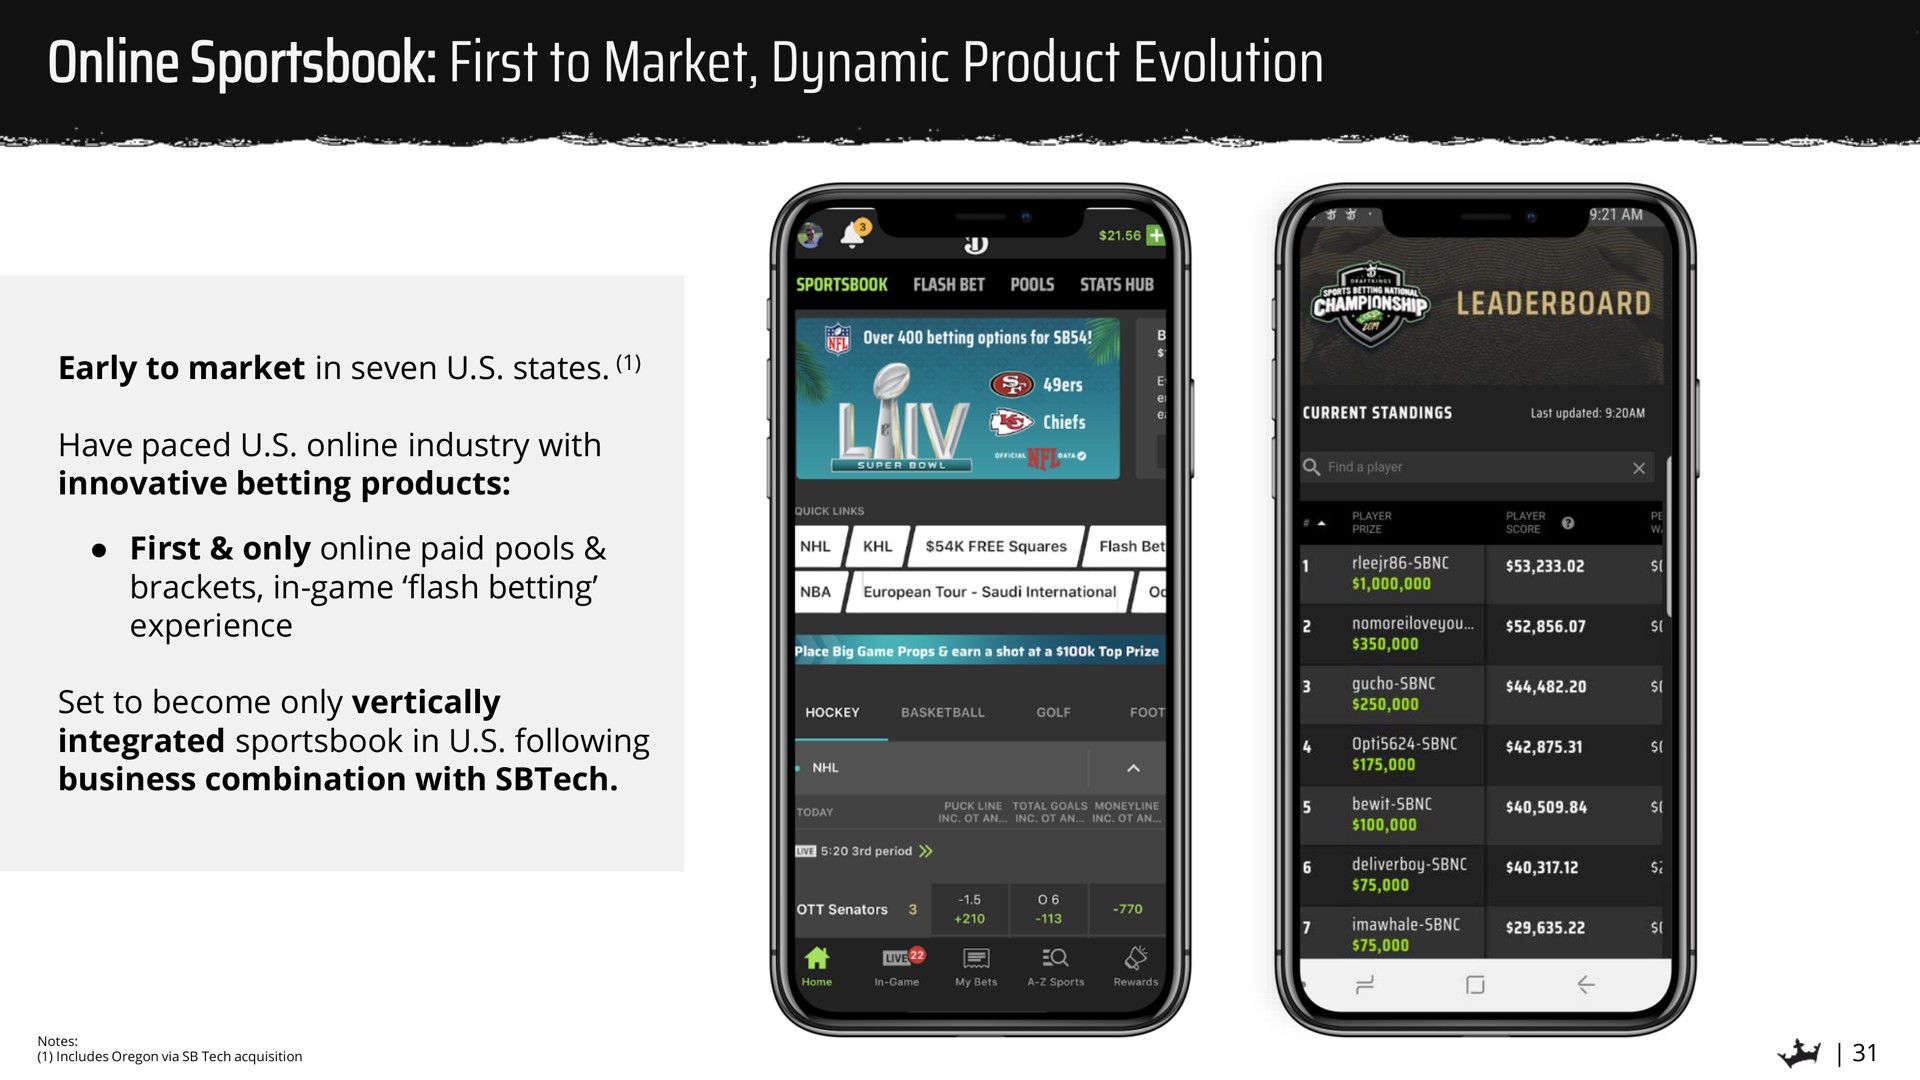 first to market dynamic product evolution | DraftKings